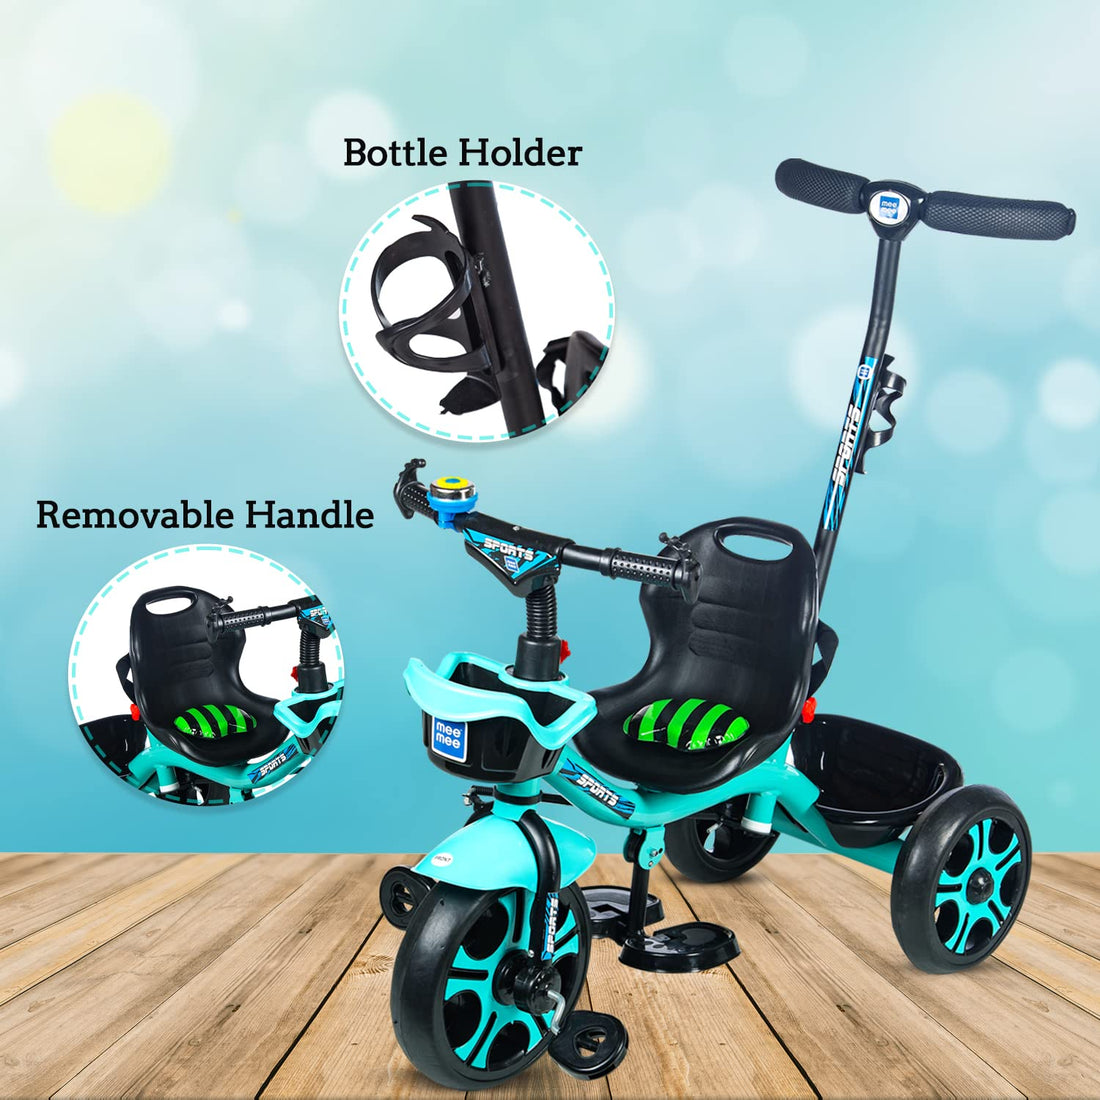 Mee Mee - Premium Baby Tricycle with Bottle Holder